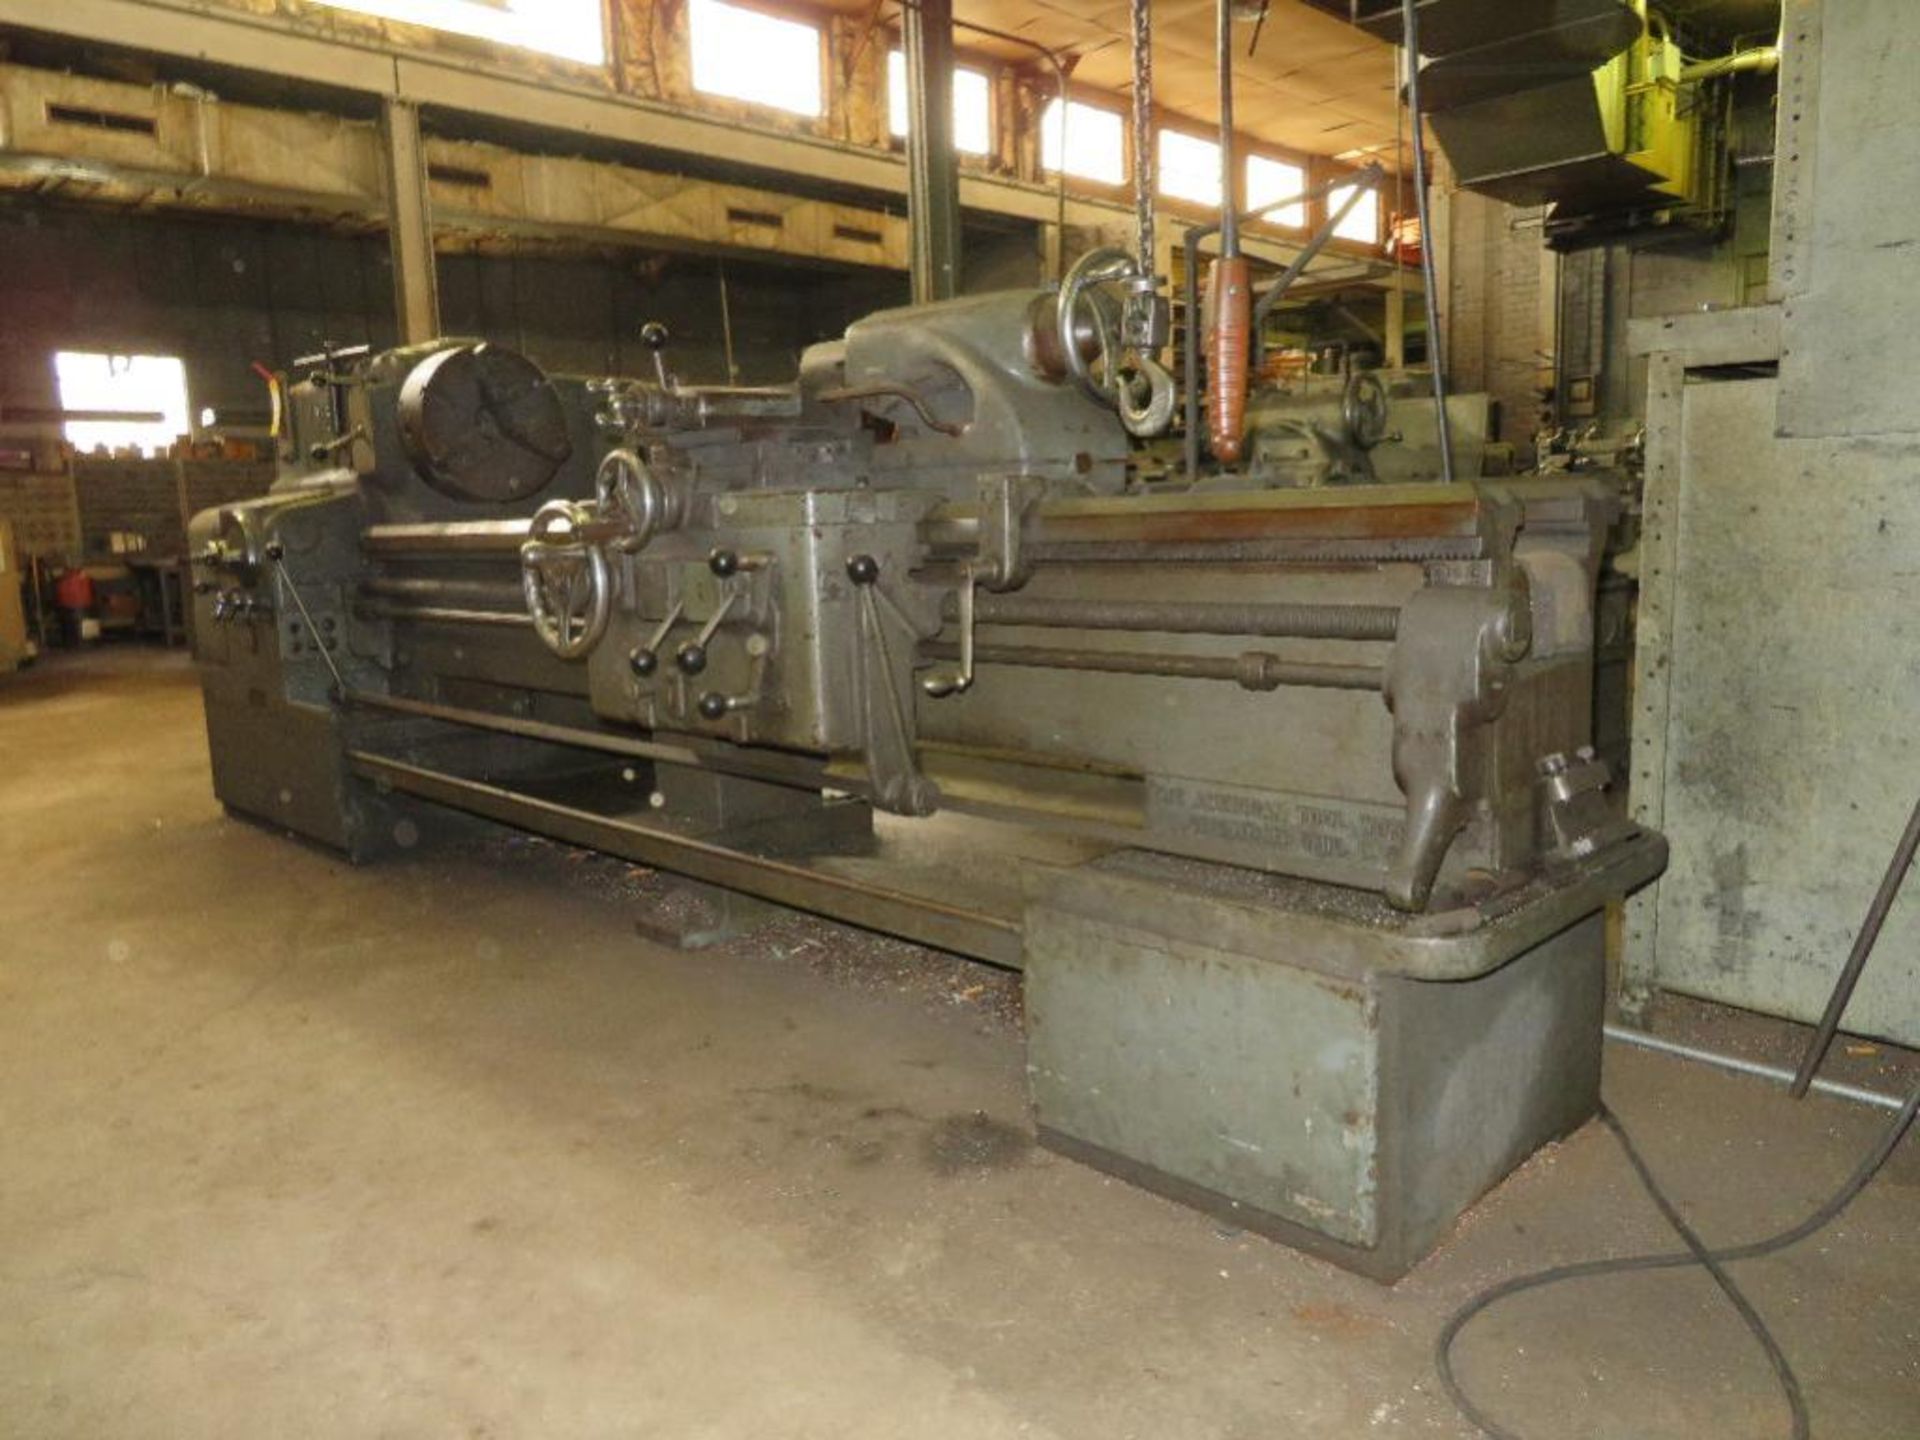 American Pacemaker 16 in. x 78 in. Geared Head Engine Lathe, S/N 75204-56, 25 - 1500 RPM, 15? 3-Jaw - Image 3 of 3